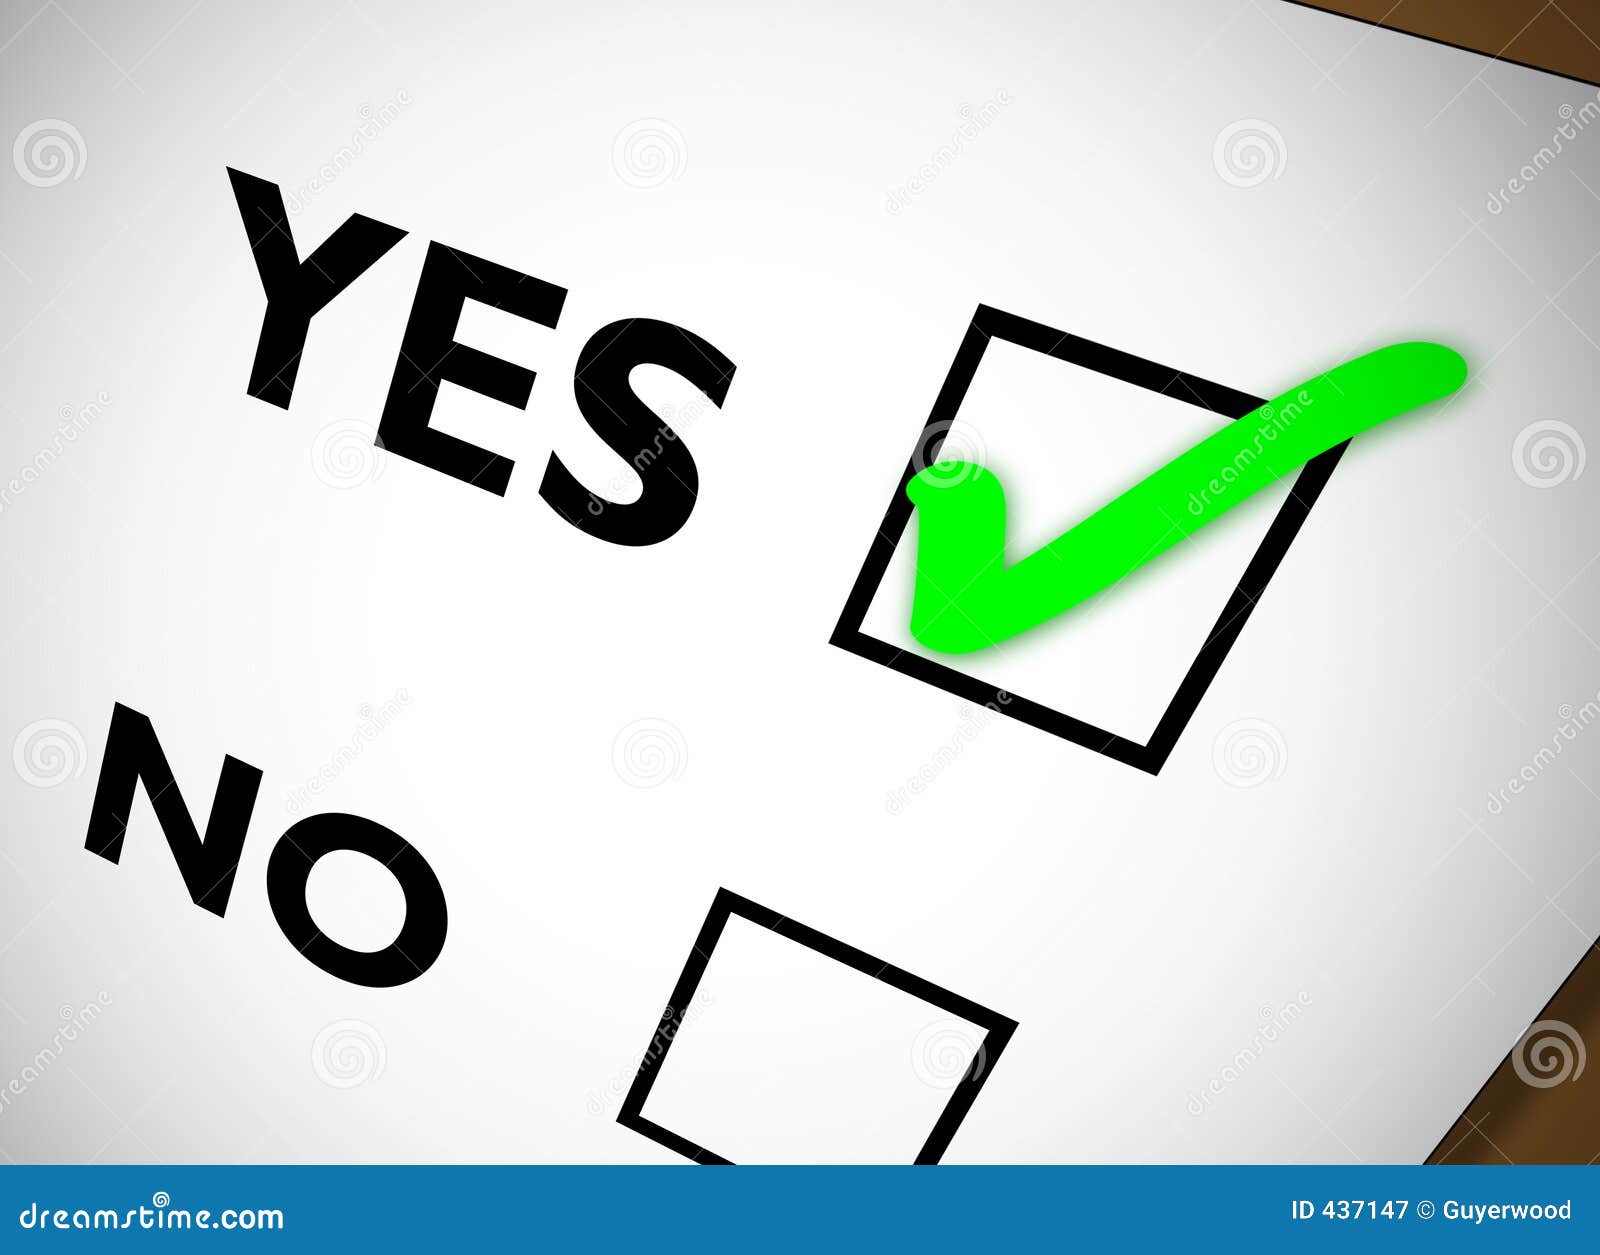 free clipart vote yes - photo #5